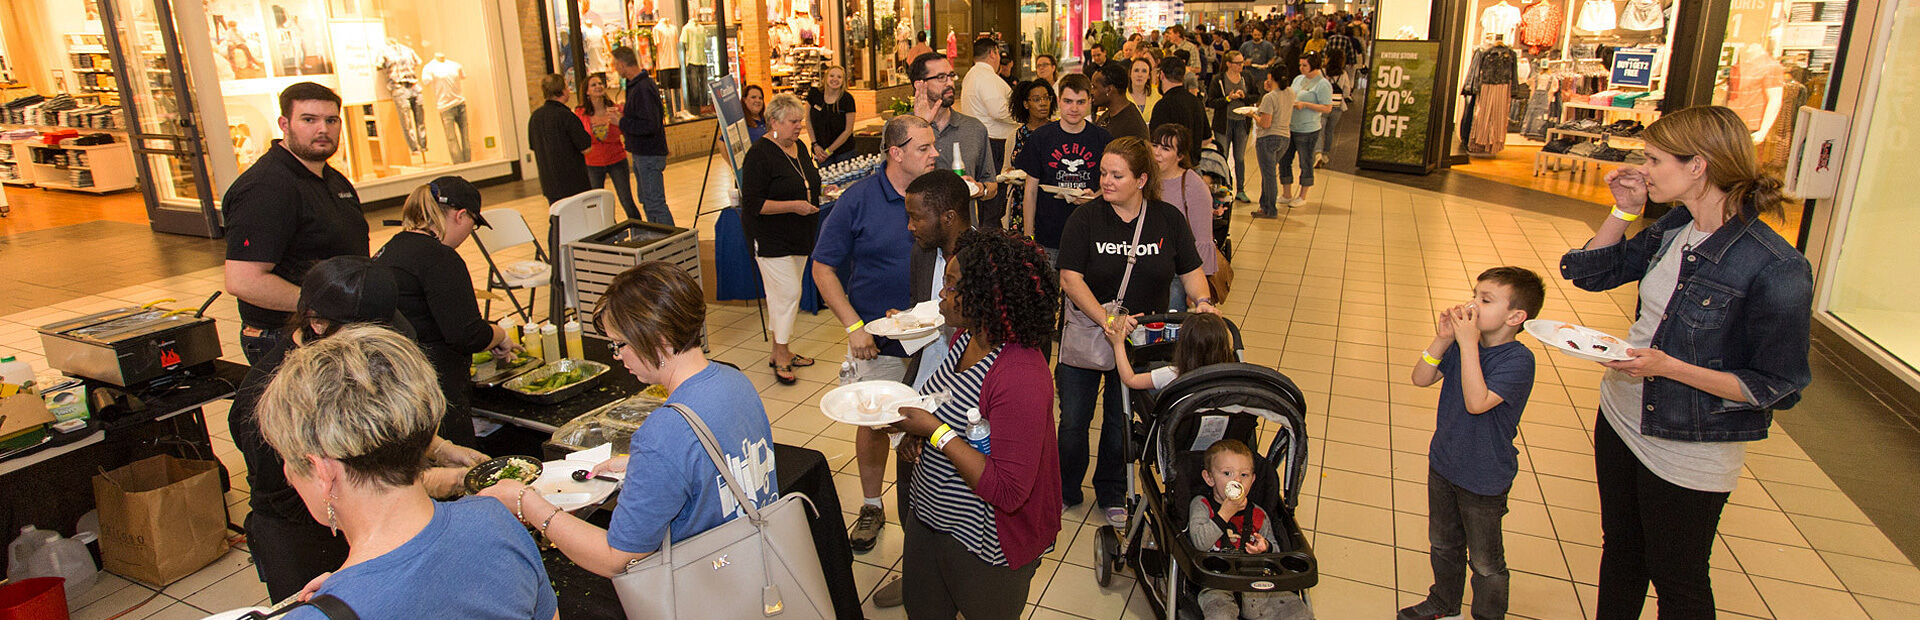 The Taste of North Texas Food and Drink Event - Golden Triangle Mall